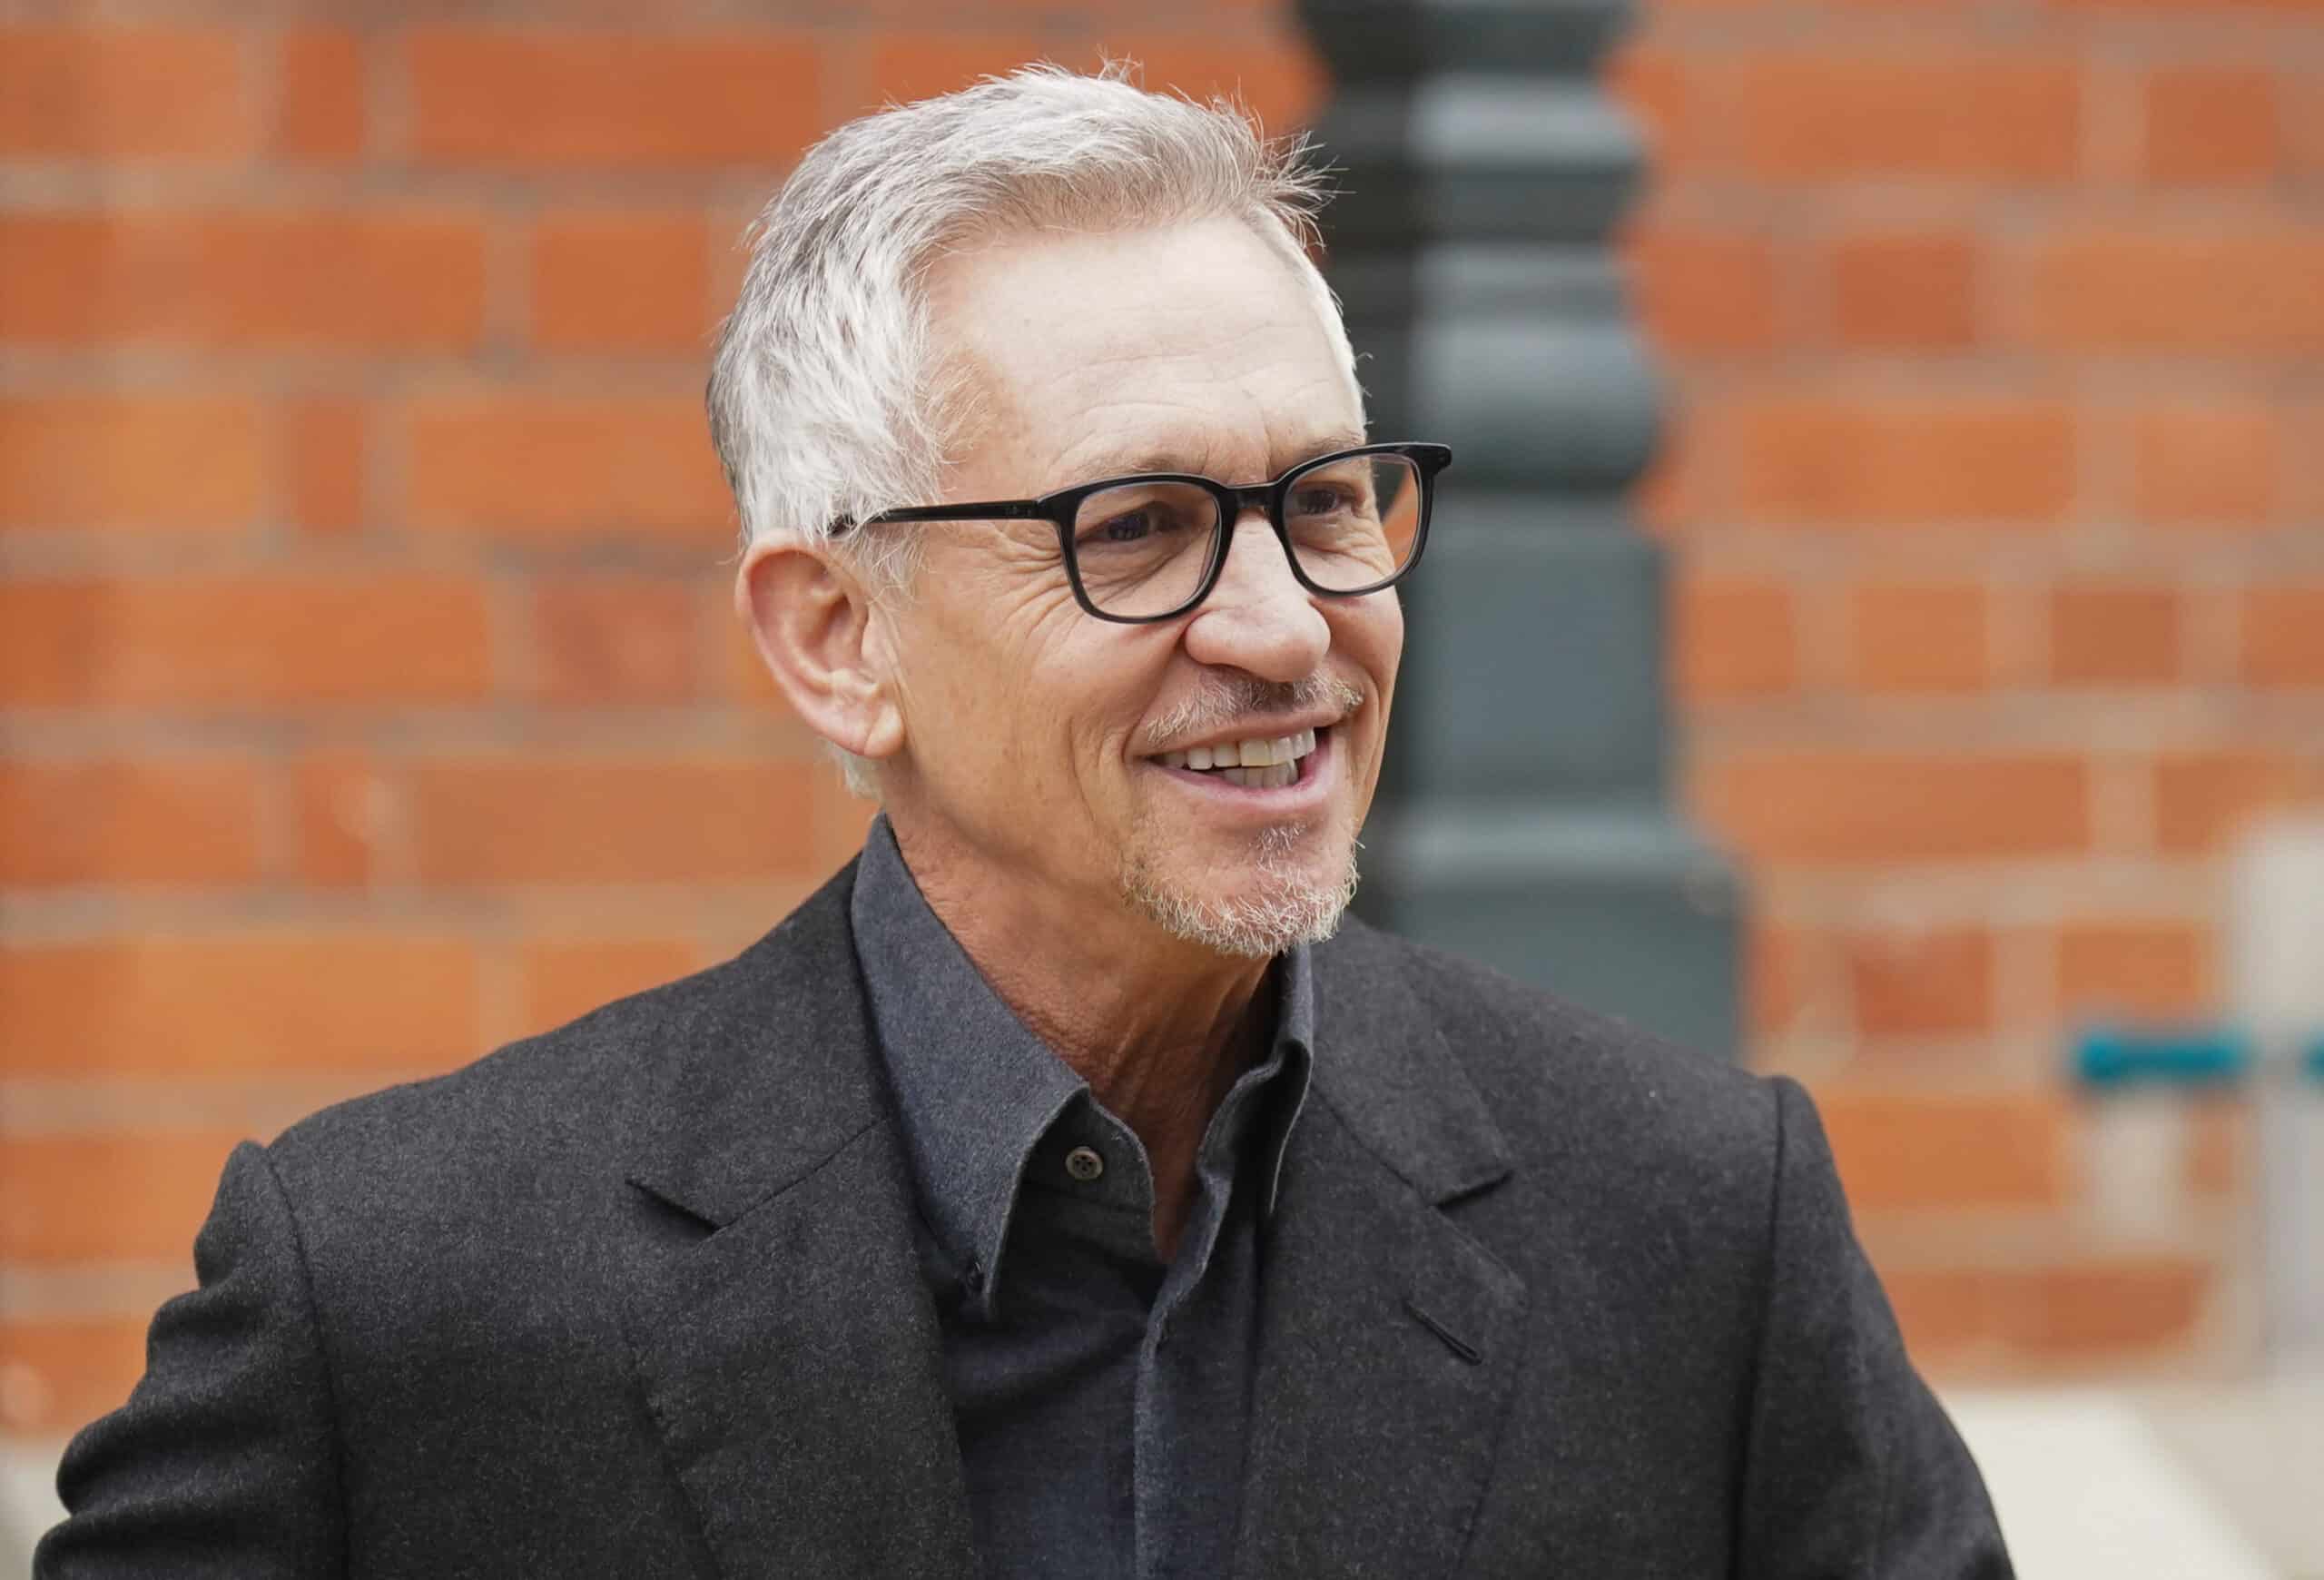 Gary Lineker ‘cried’ after public support from Ian Wright and Alan Shearer, son reveals